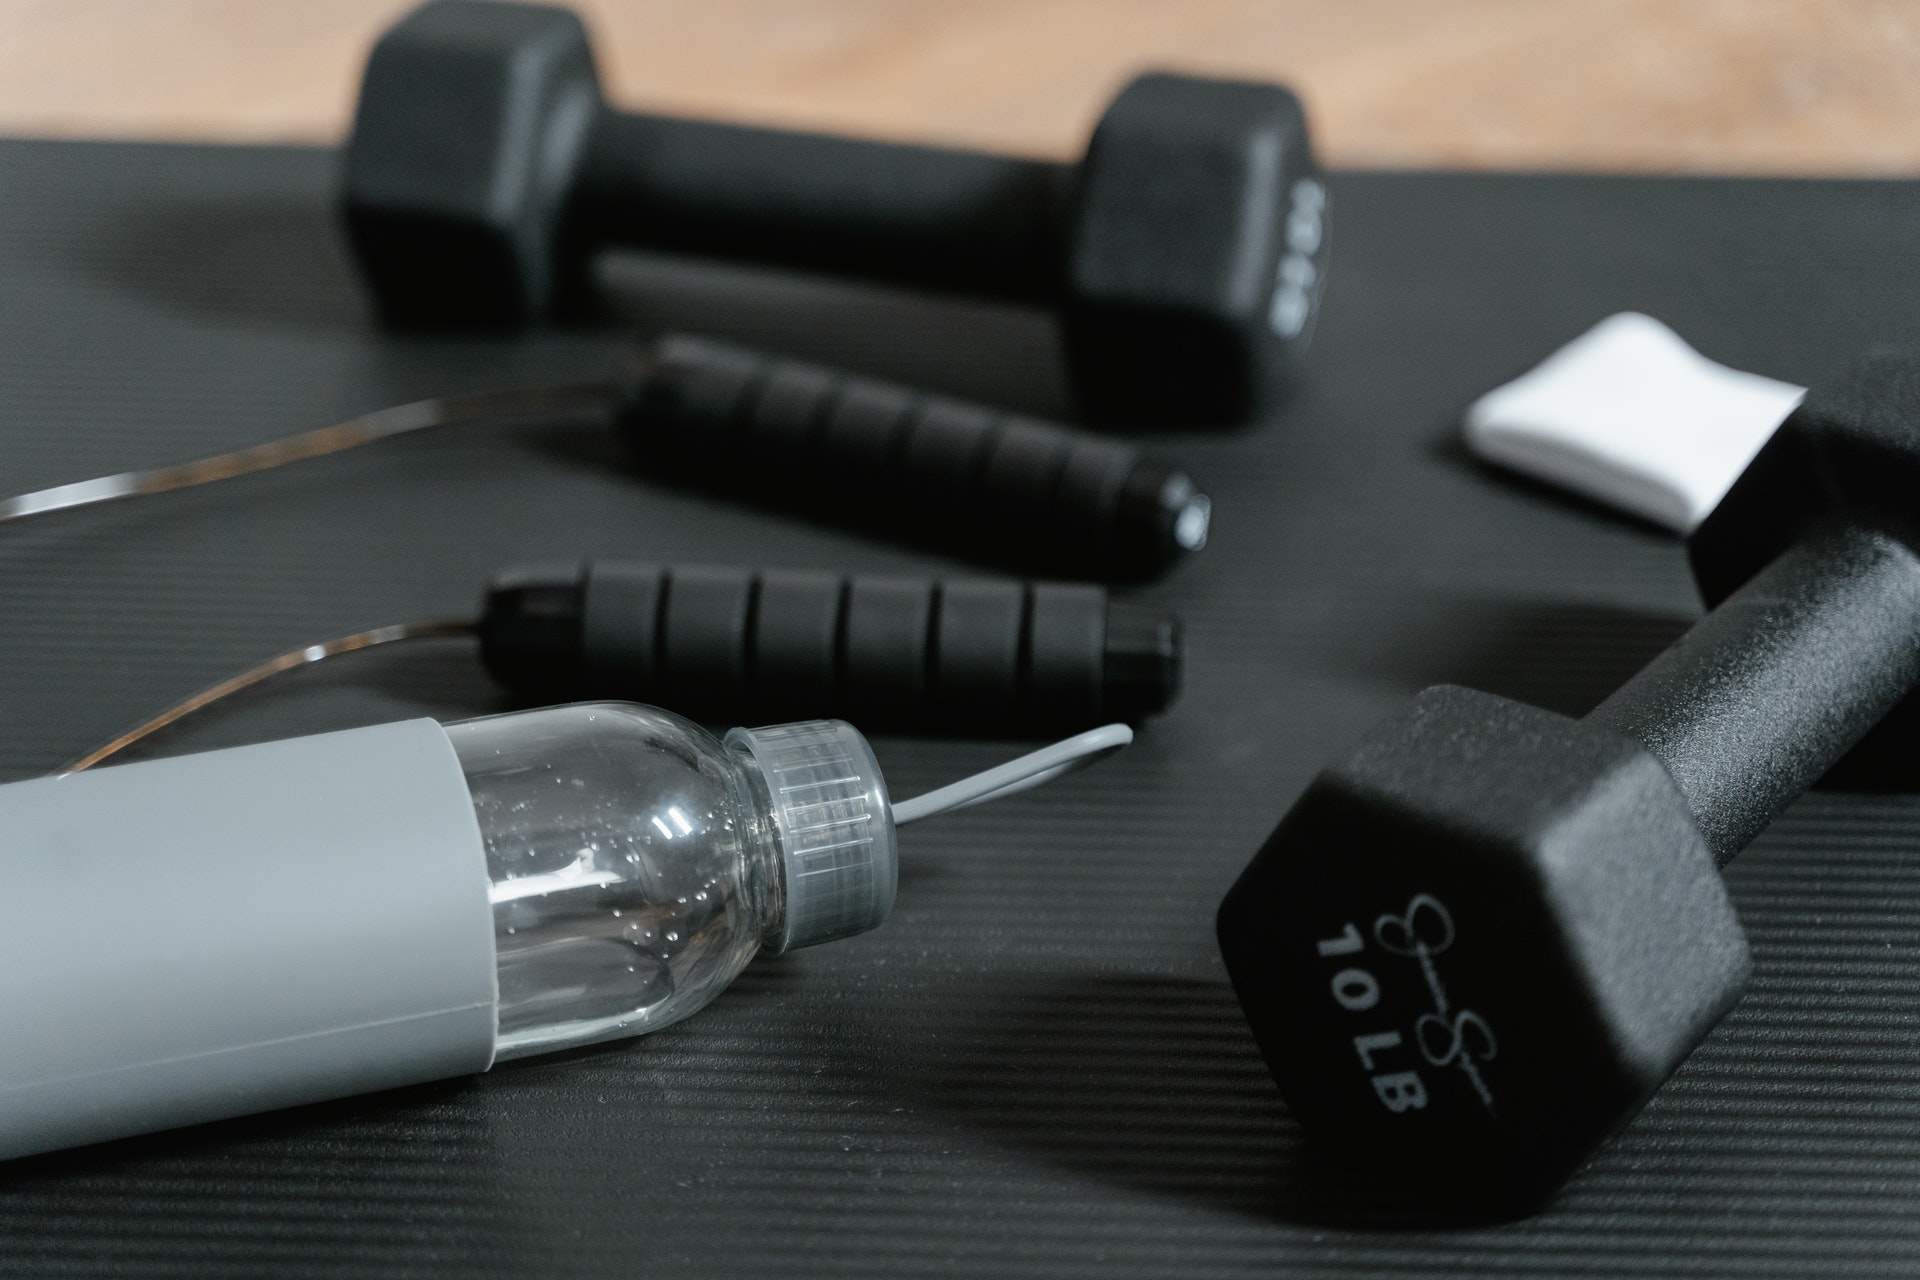 Dumbells, skipping rope and water bottle laying on an exercise mat